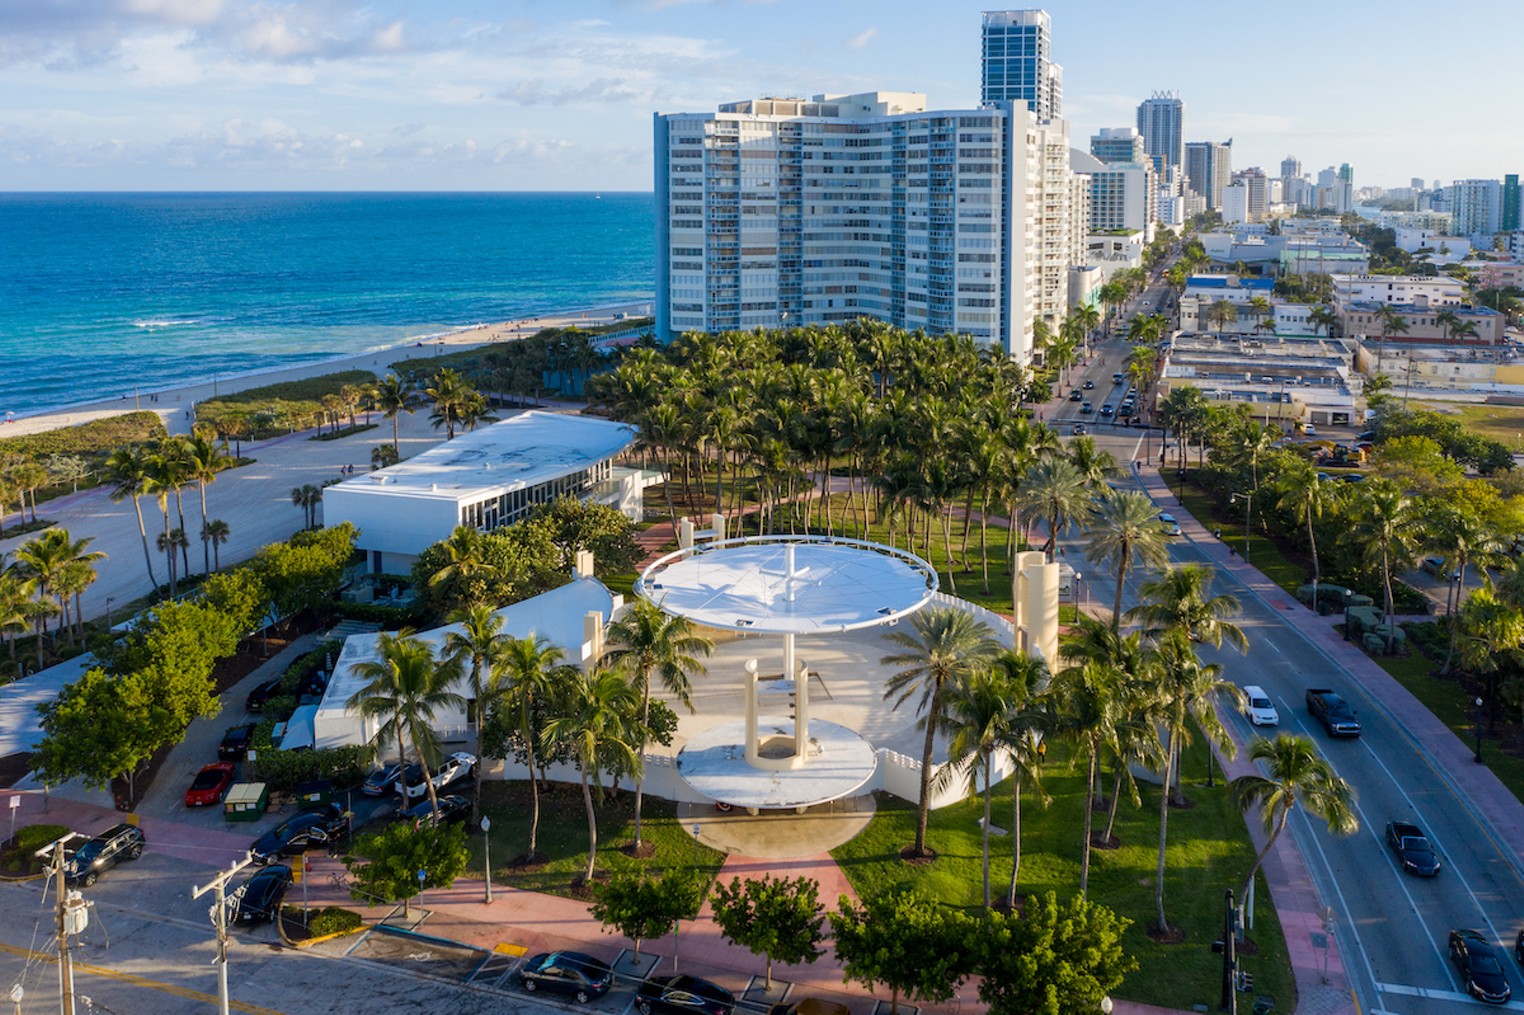 Best Venue for Local Acts 2019 North Beach Bandshell Best Restaurants, Bars, Clubs, Music and Stores in Miami Miami New Times picture